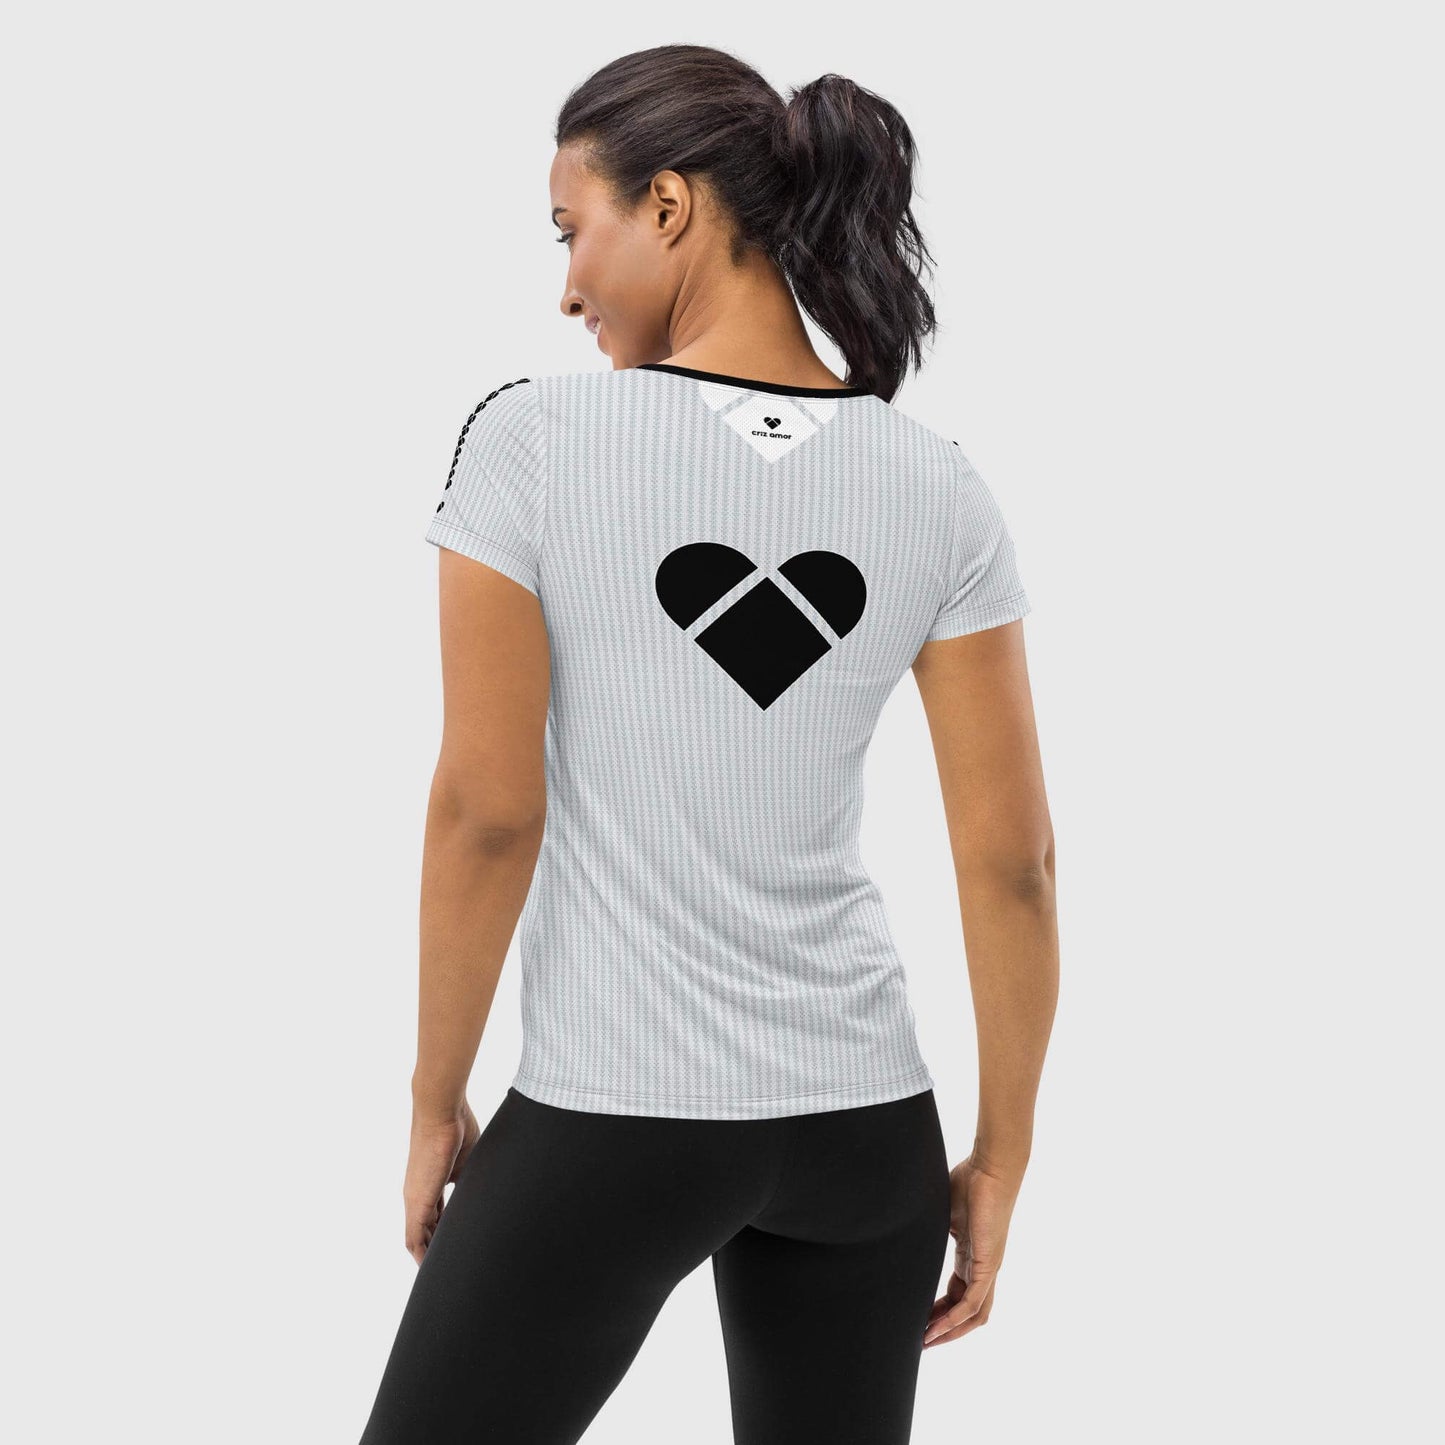 model wearing Women's light gray sport shirt with black heart and logo stripe on sleeves from CRiZ AMOR's Amor Primero collection